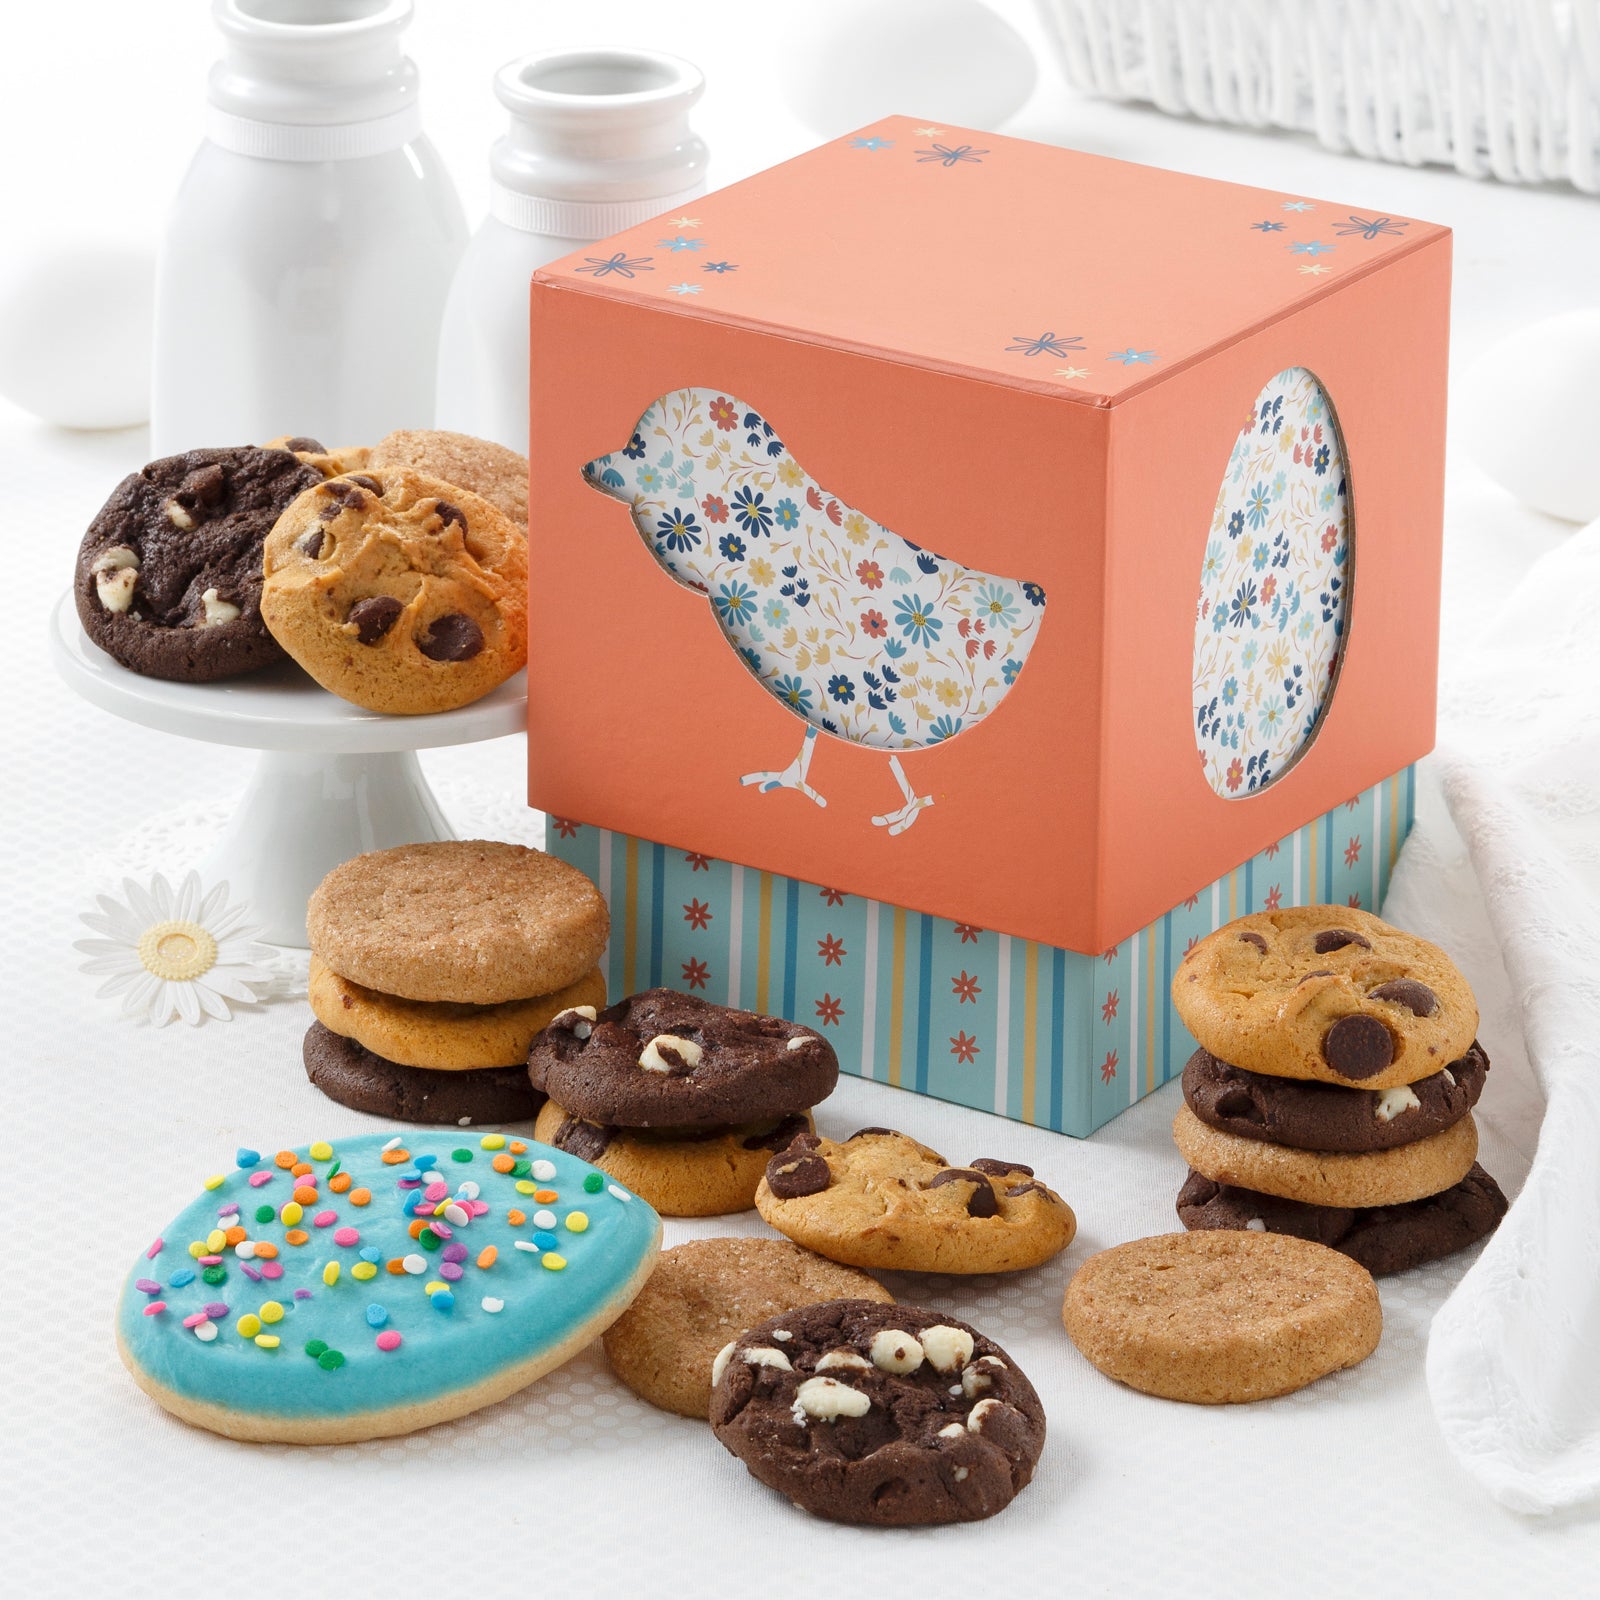 A coral and blue Easter themed mini gift box surrounded by an assortment of nibblers and a frosted egg cookie.